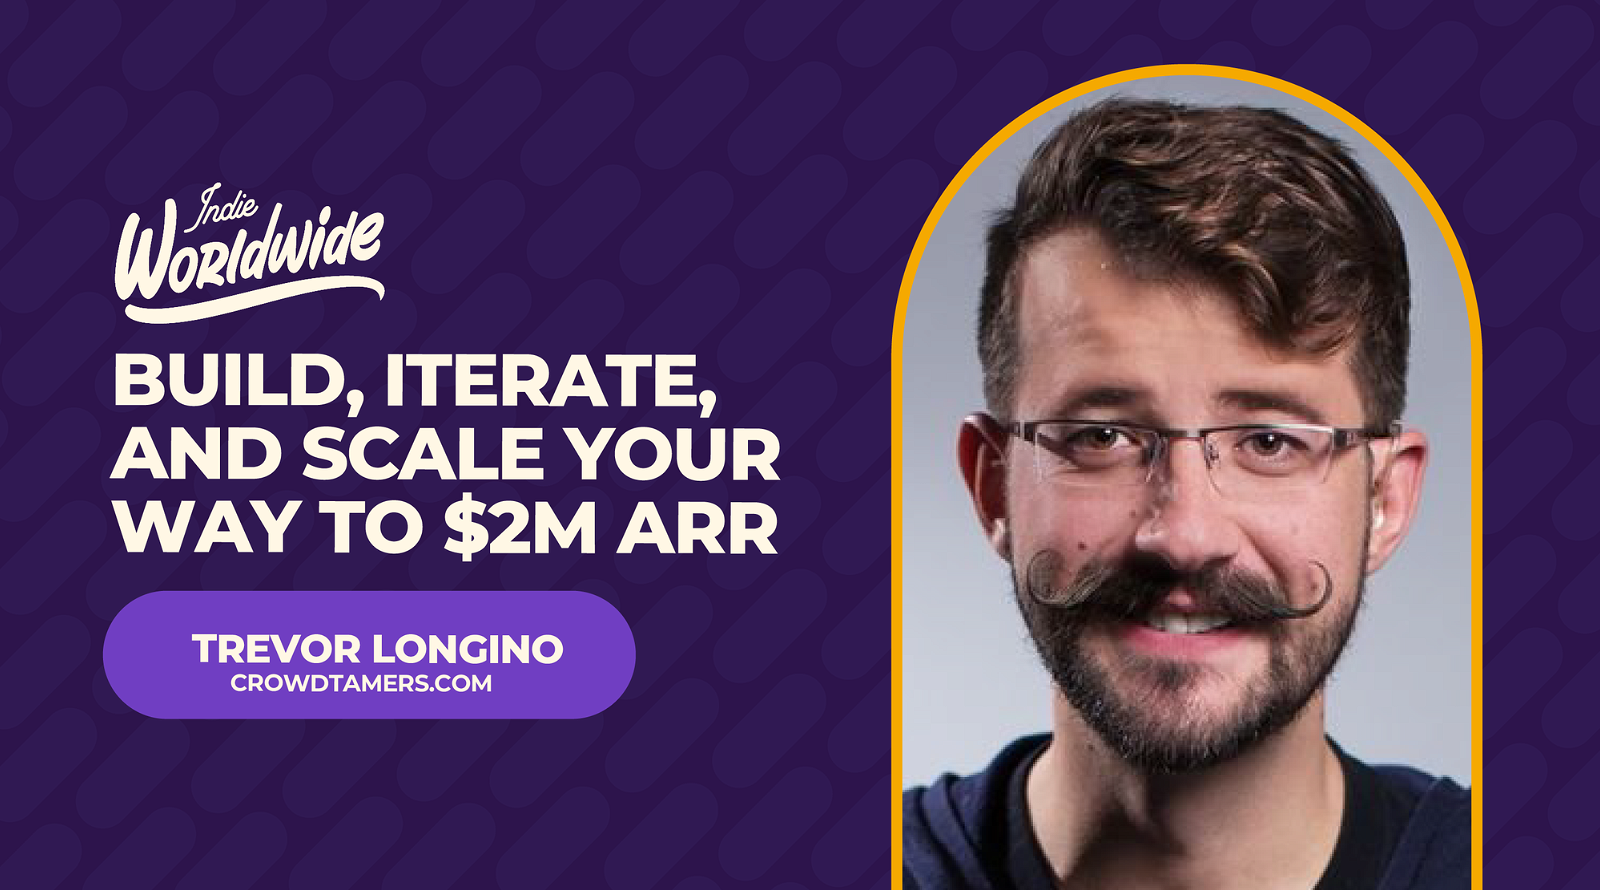 How to scale your startup to $2M ARR - Trevor Longino